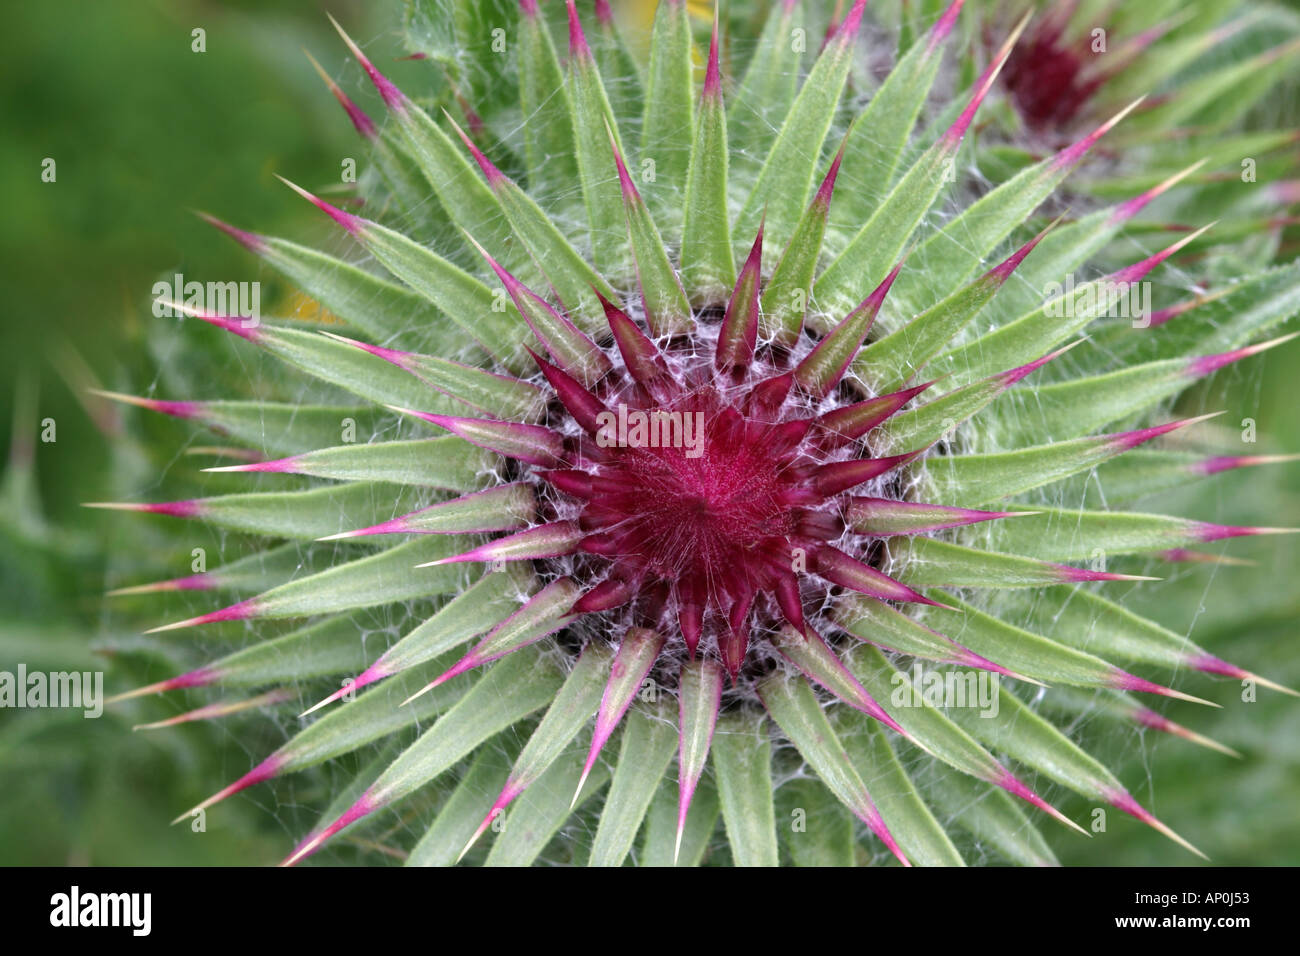 Woolly Thistle flower bud Banque D'Images